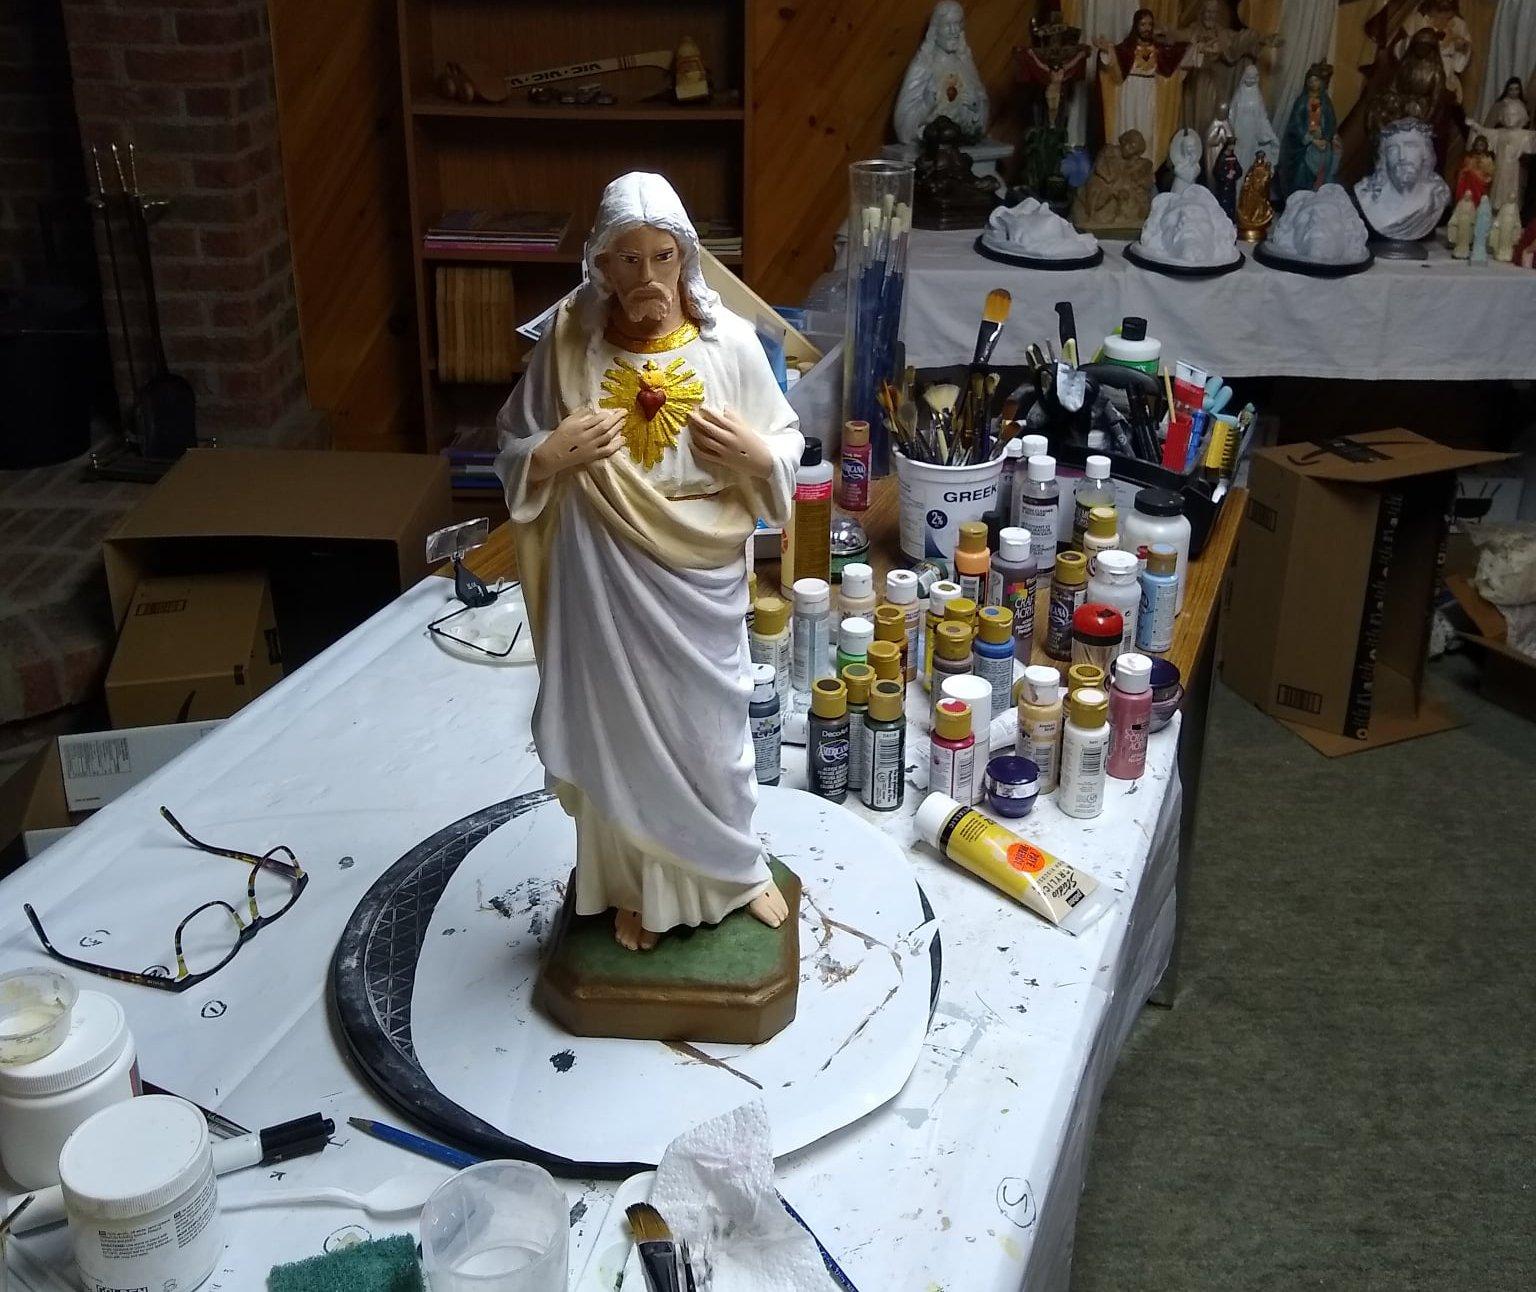 Self-taught restorer helps save statues for personal devotion in Quebec